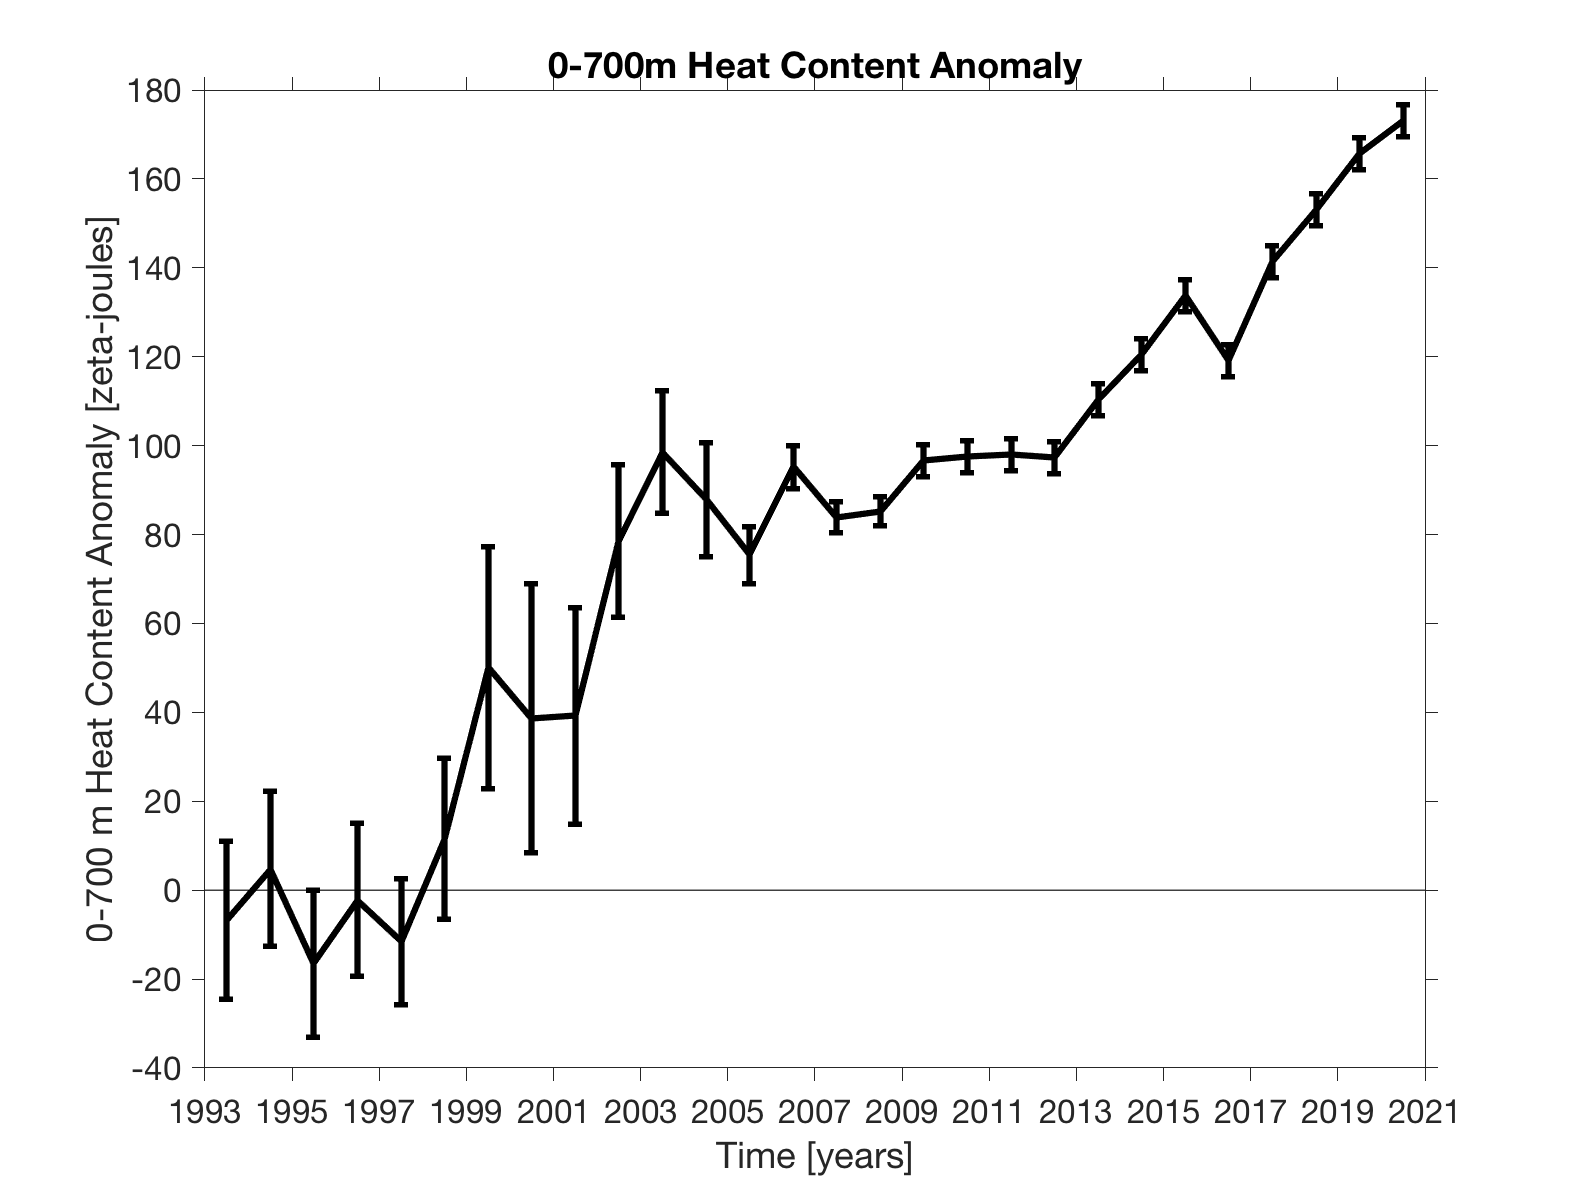 The plot shows the 23-year trend in 0-700 m Ocean Heat Content Anomaly (OHCA) estimated from in situ data ( Lyman et al. 2010, Lyman and Johnson 2014). The error bars include uncertainties from baseline climatology, mapping method, sampling, and XBT bias correction.